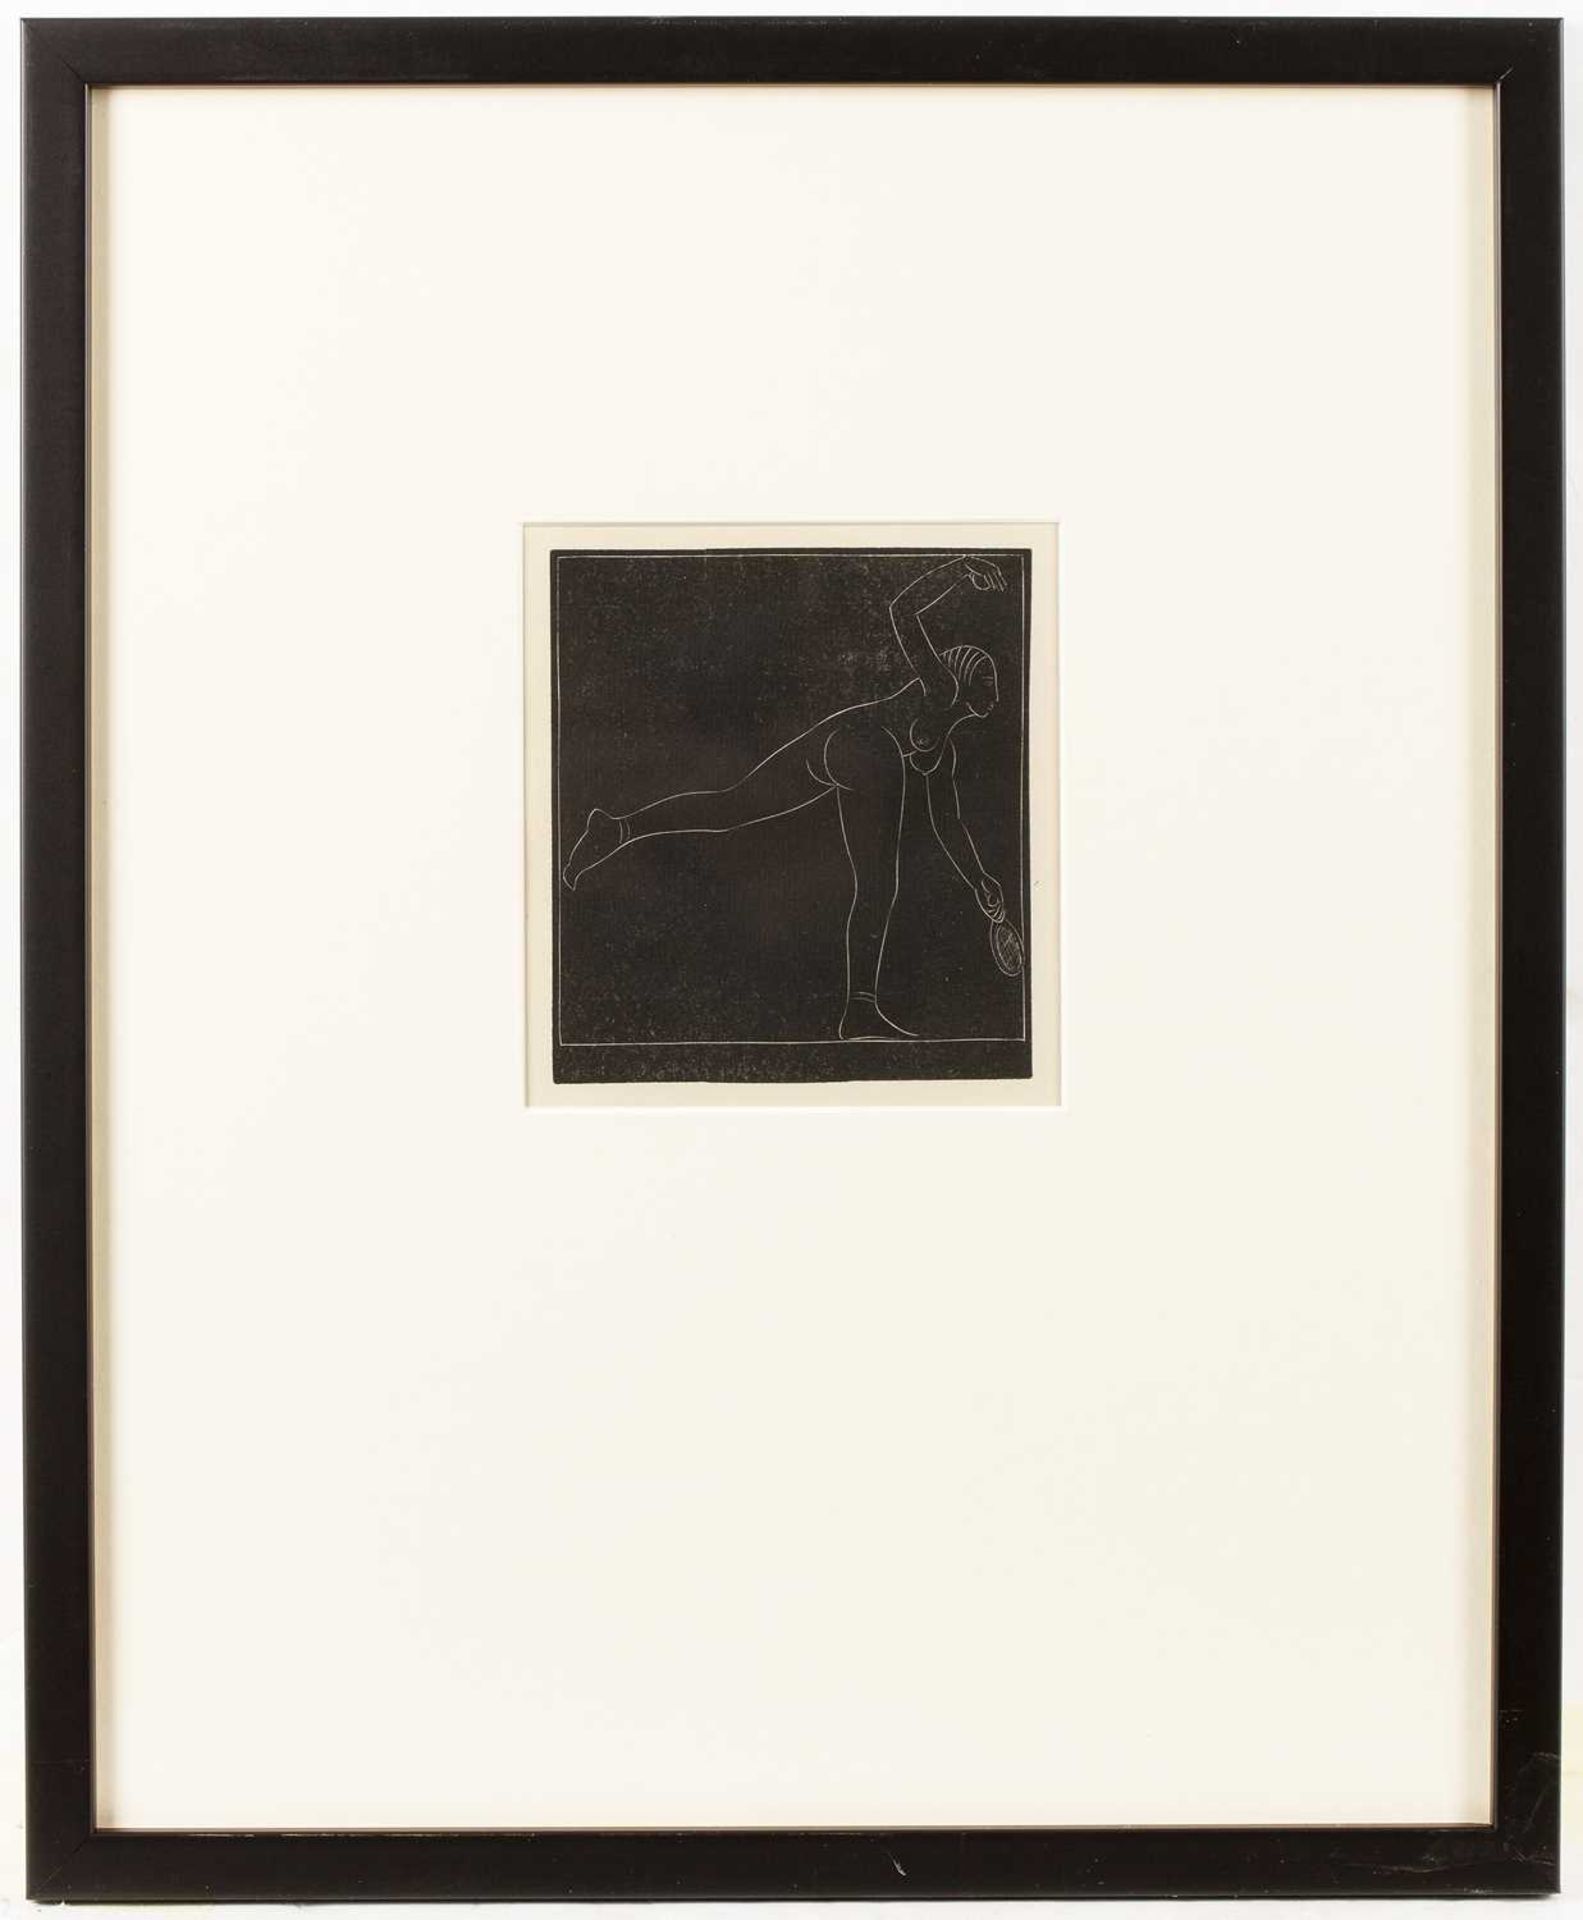 Eric Gill (1882-1940) The Tennis Player, 1924 wood engraving 11.5 x 10cm. - Image 2 of 3